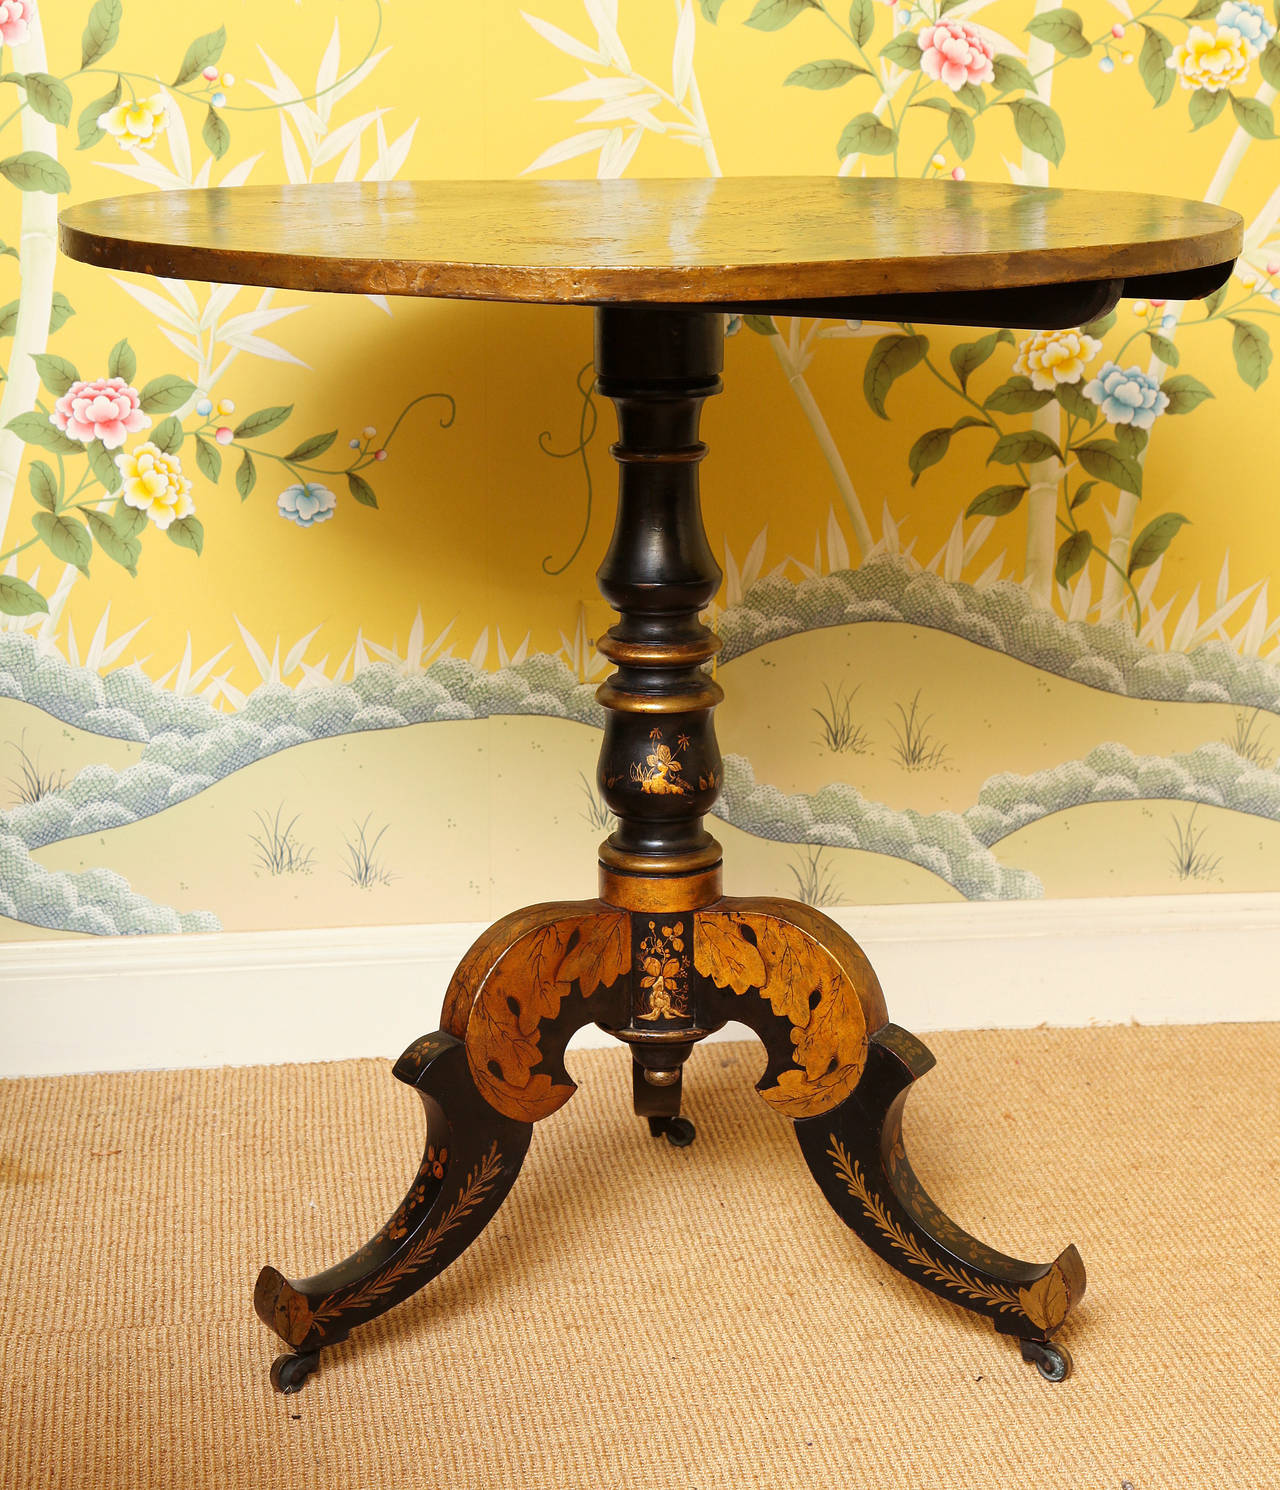 Hand-Carved Japanned Chinoiserie Gilt Decorated Circular Tilt-Top Table, French, circa 1810 For Sale